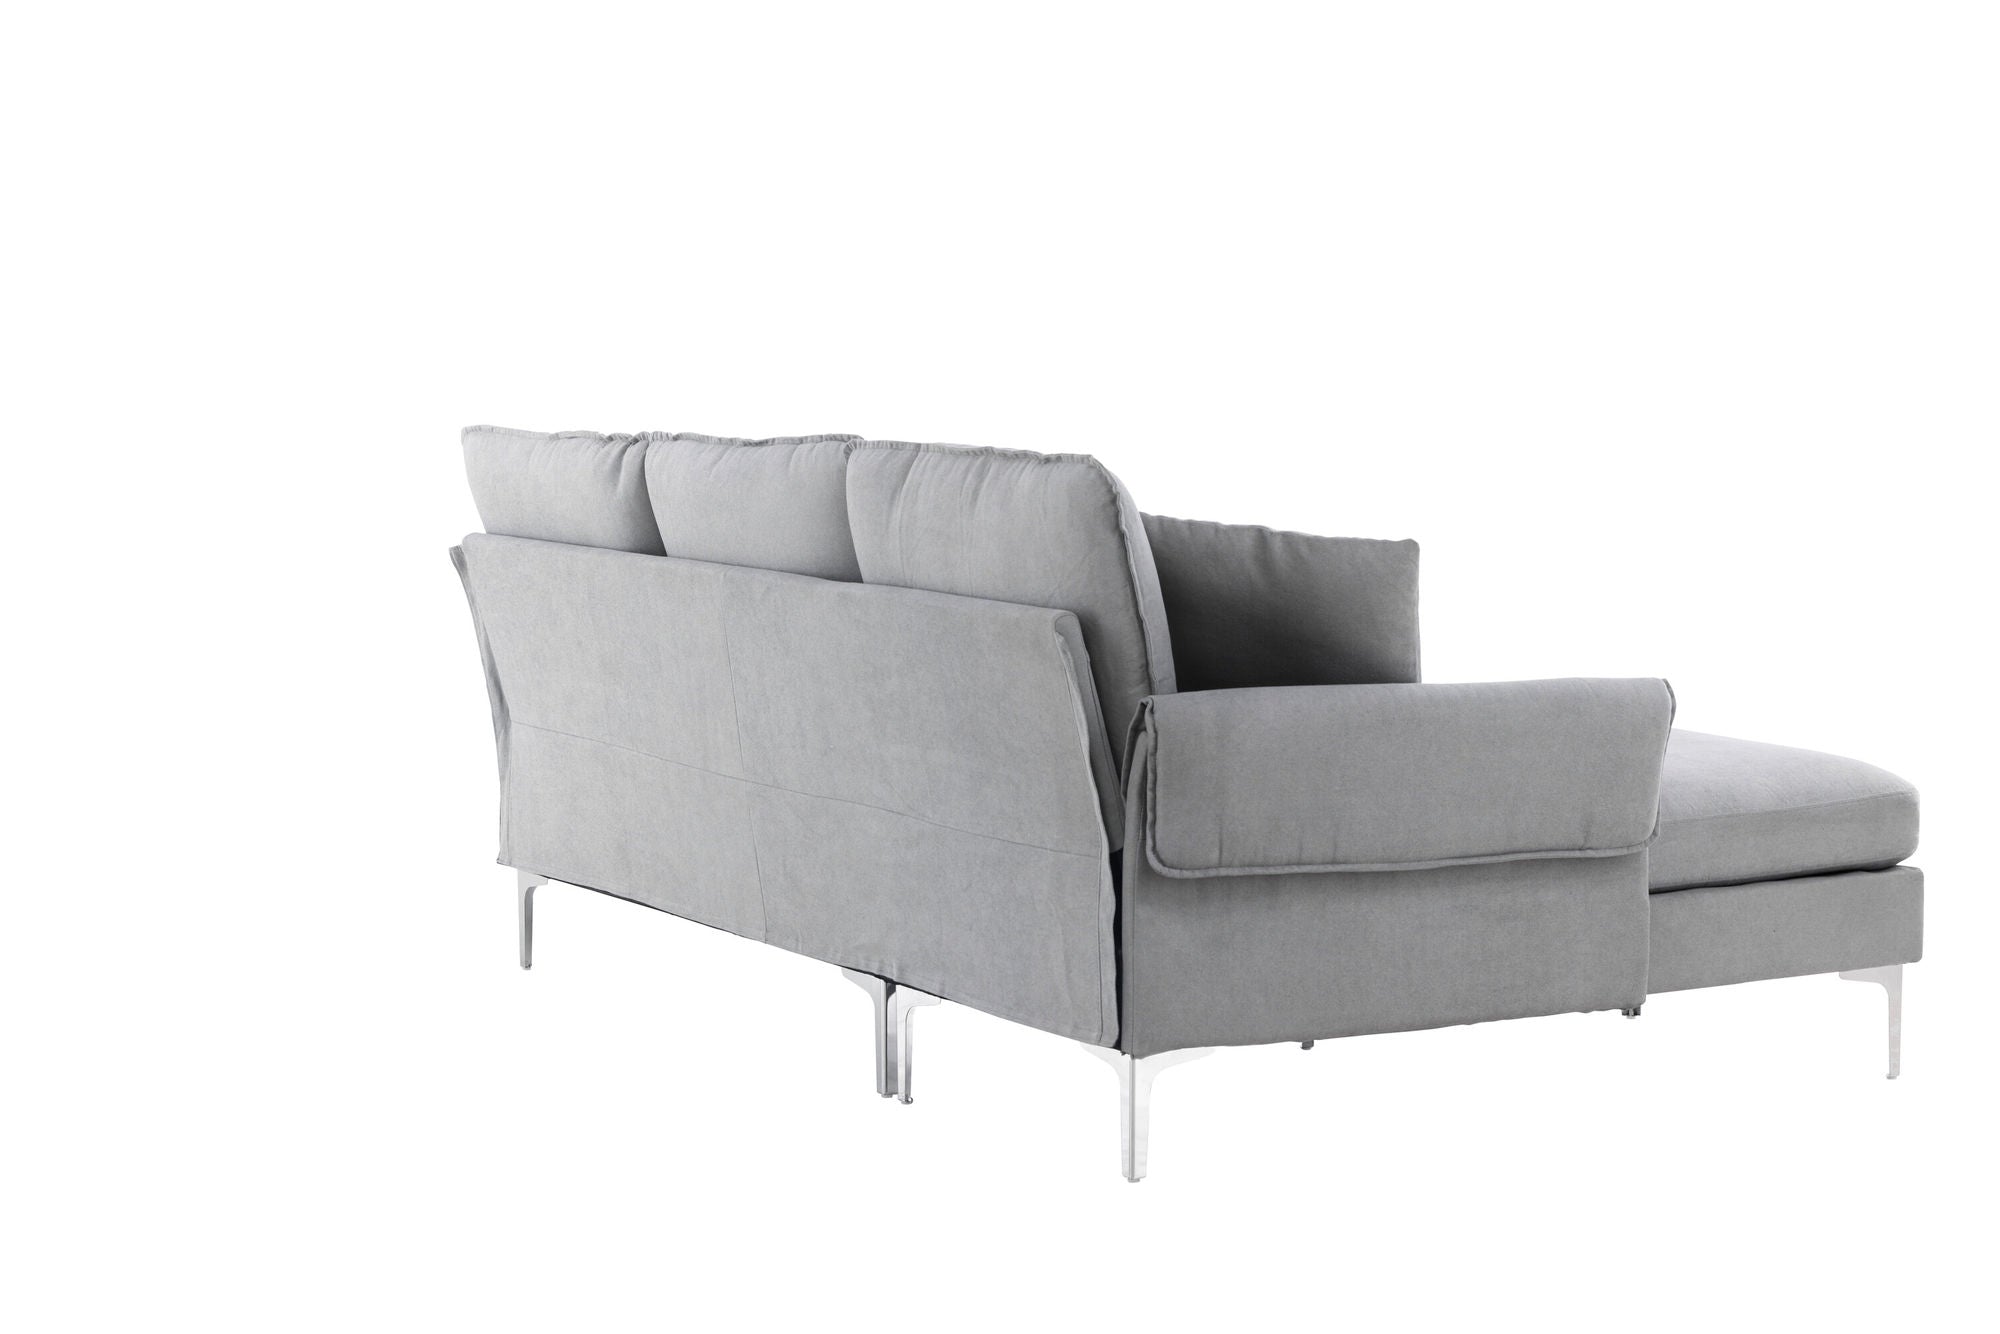 Venture Home Toulouse Sofa - Grey Fabric